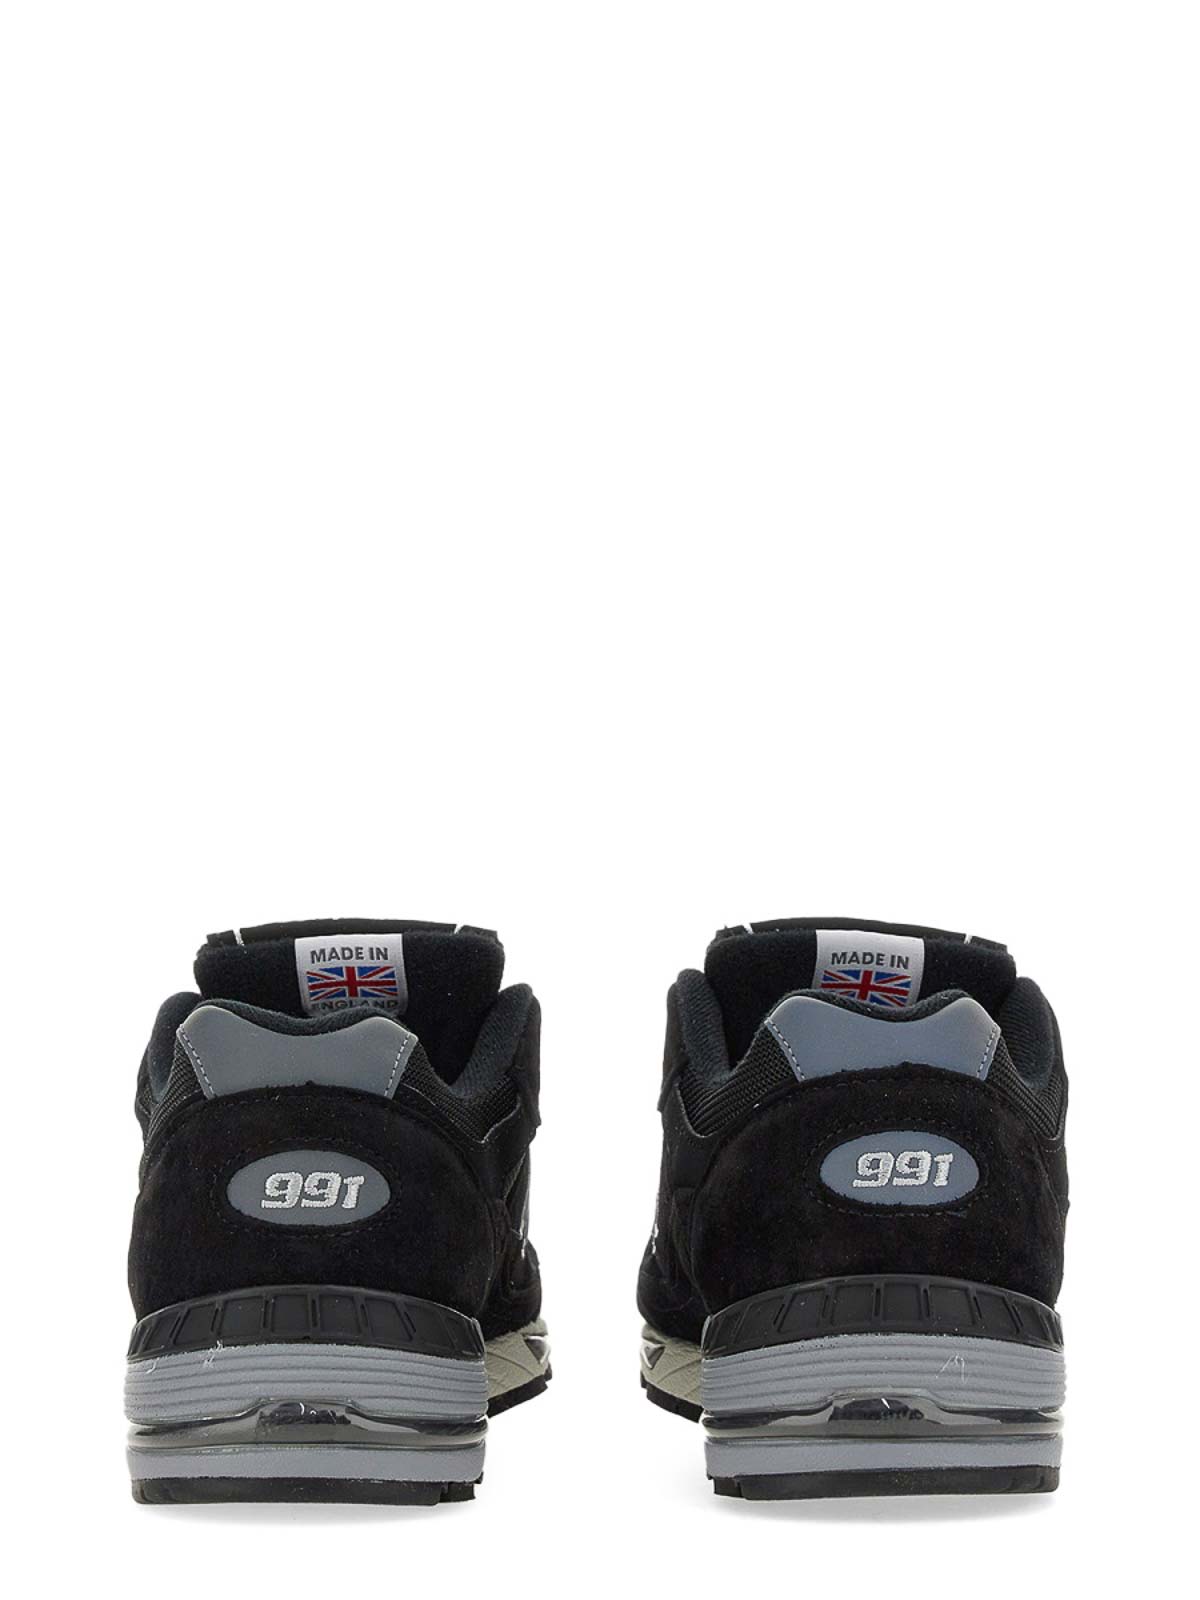 Shop New Balance 991 Sneakers In Black